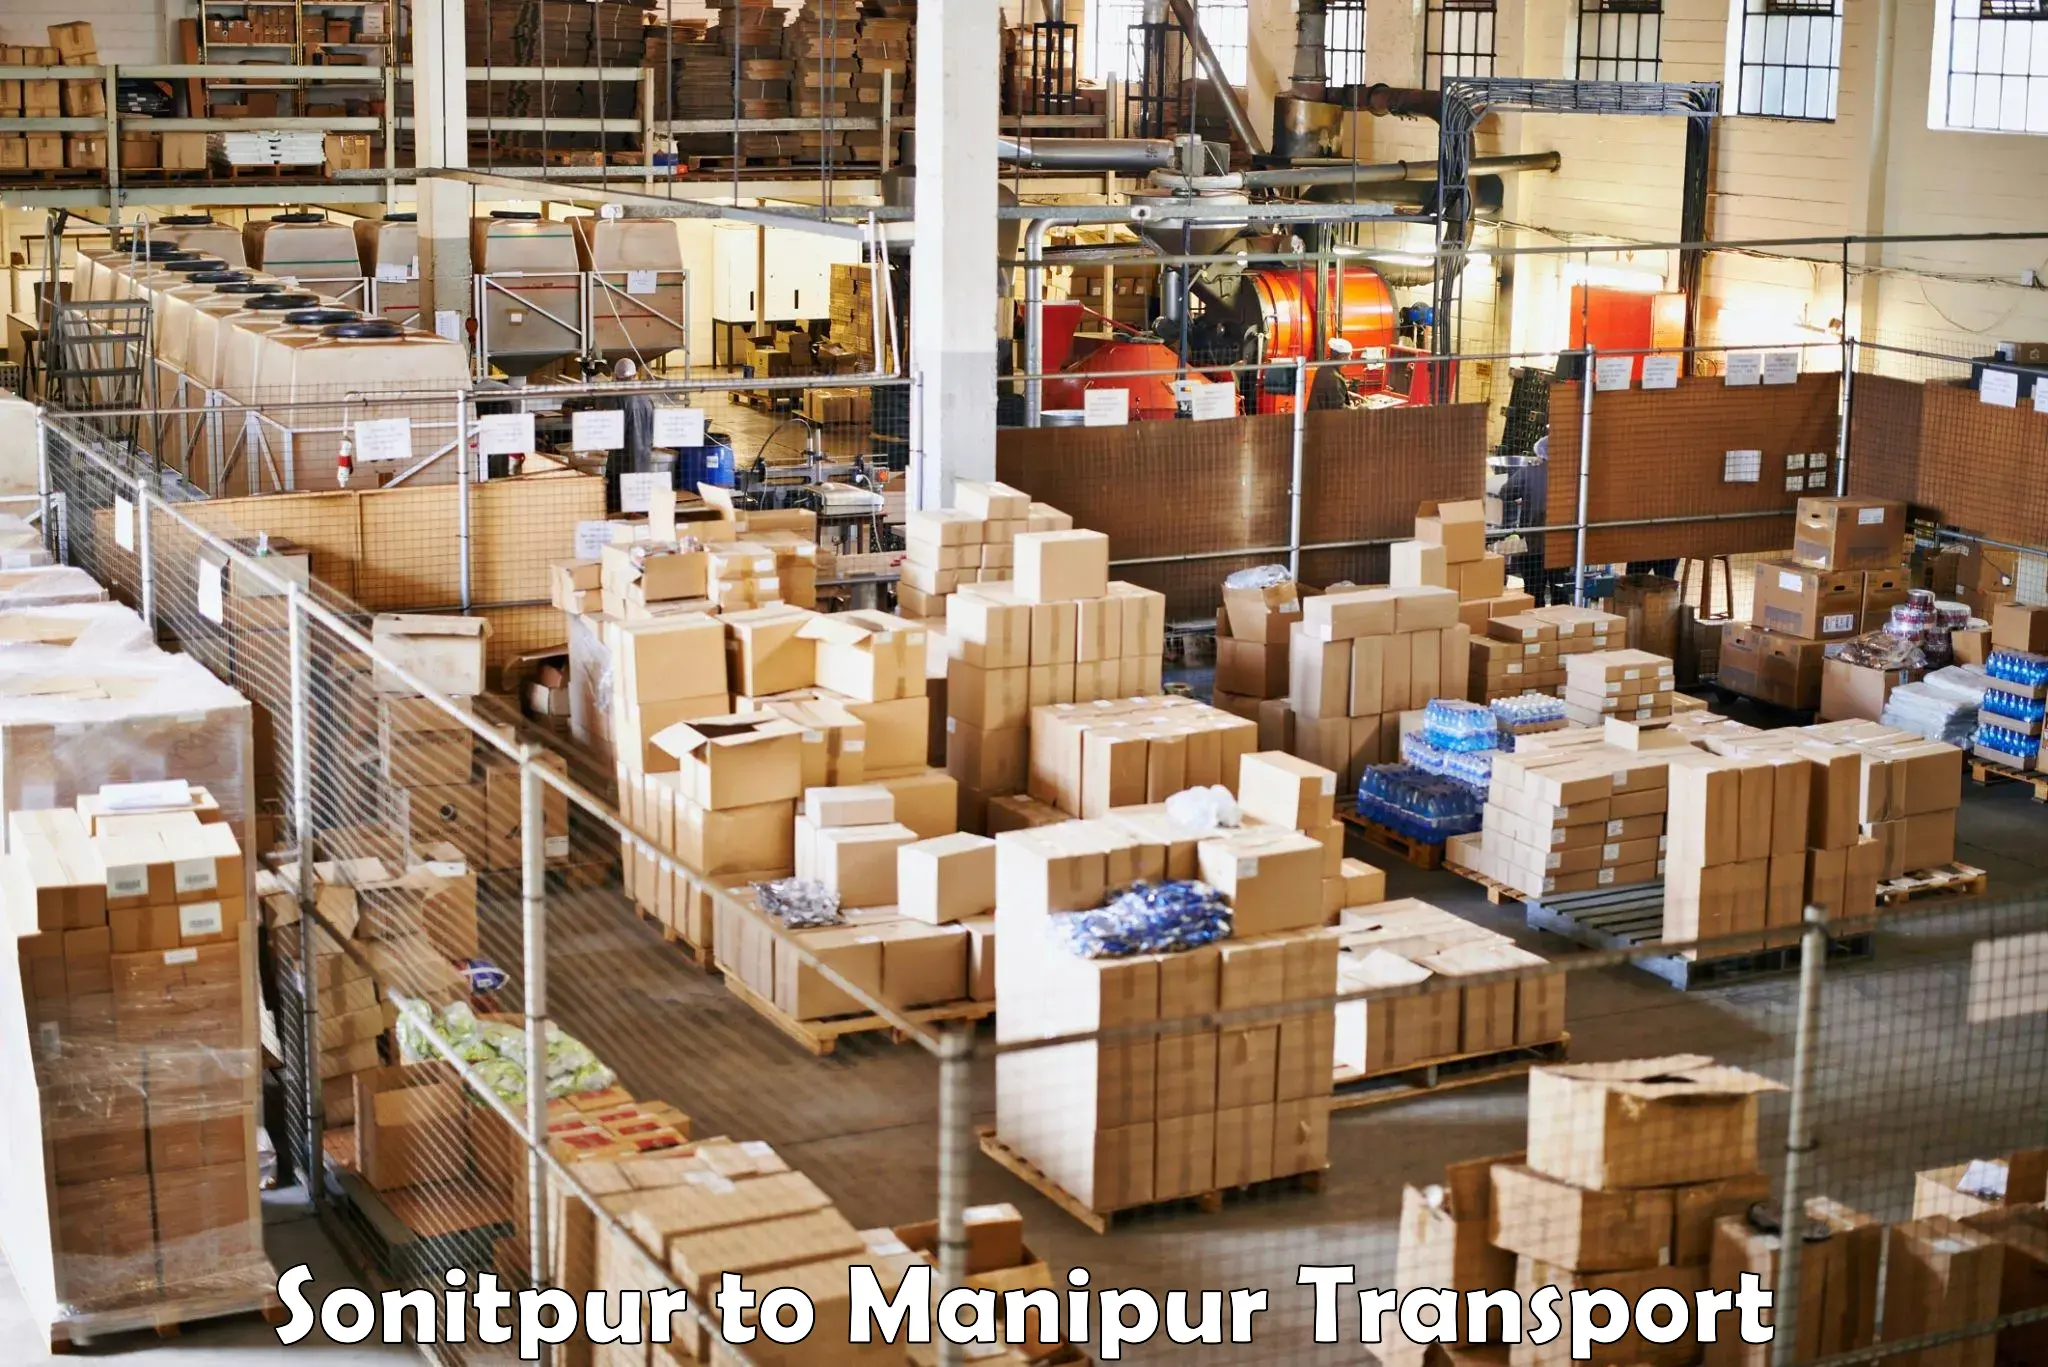 Daily parcel service transport Sonitpur to Imphal